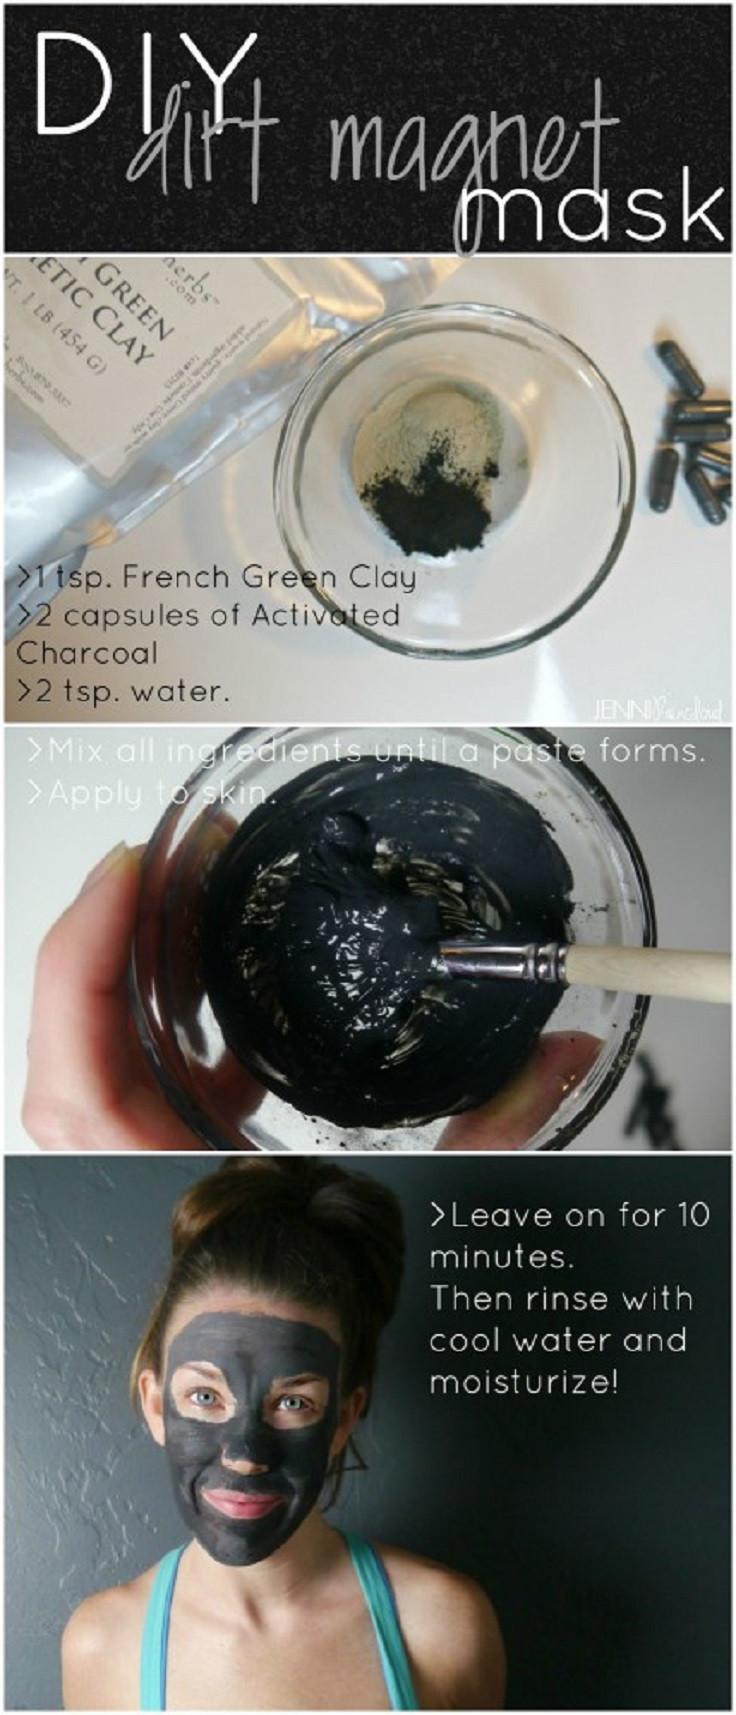 Active Charcoal Mask DIY
 15 Best DIY Charcoal Mask Recipes and Beauty Products